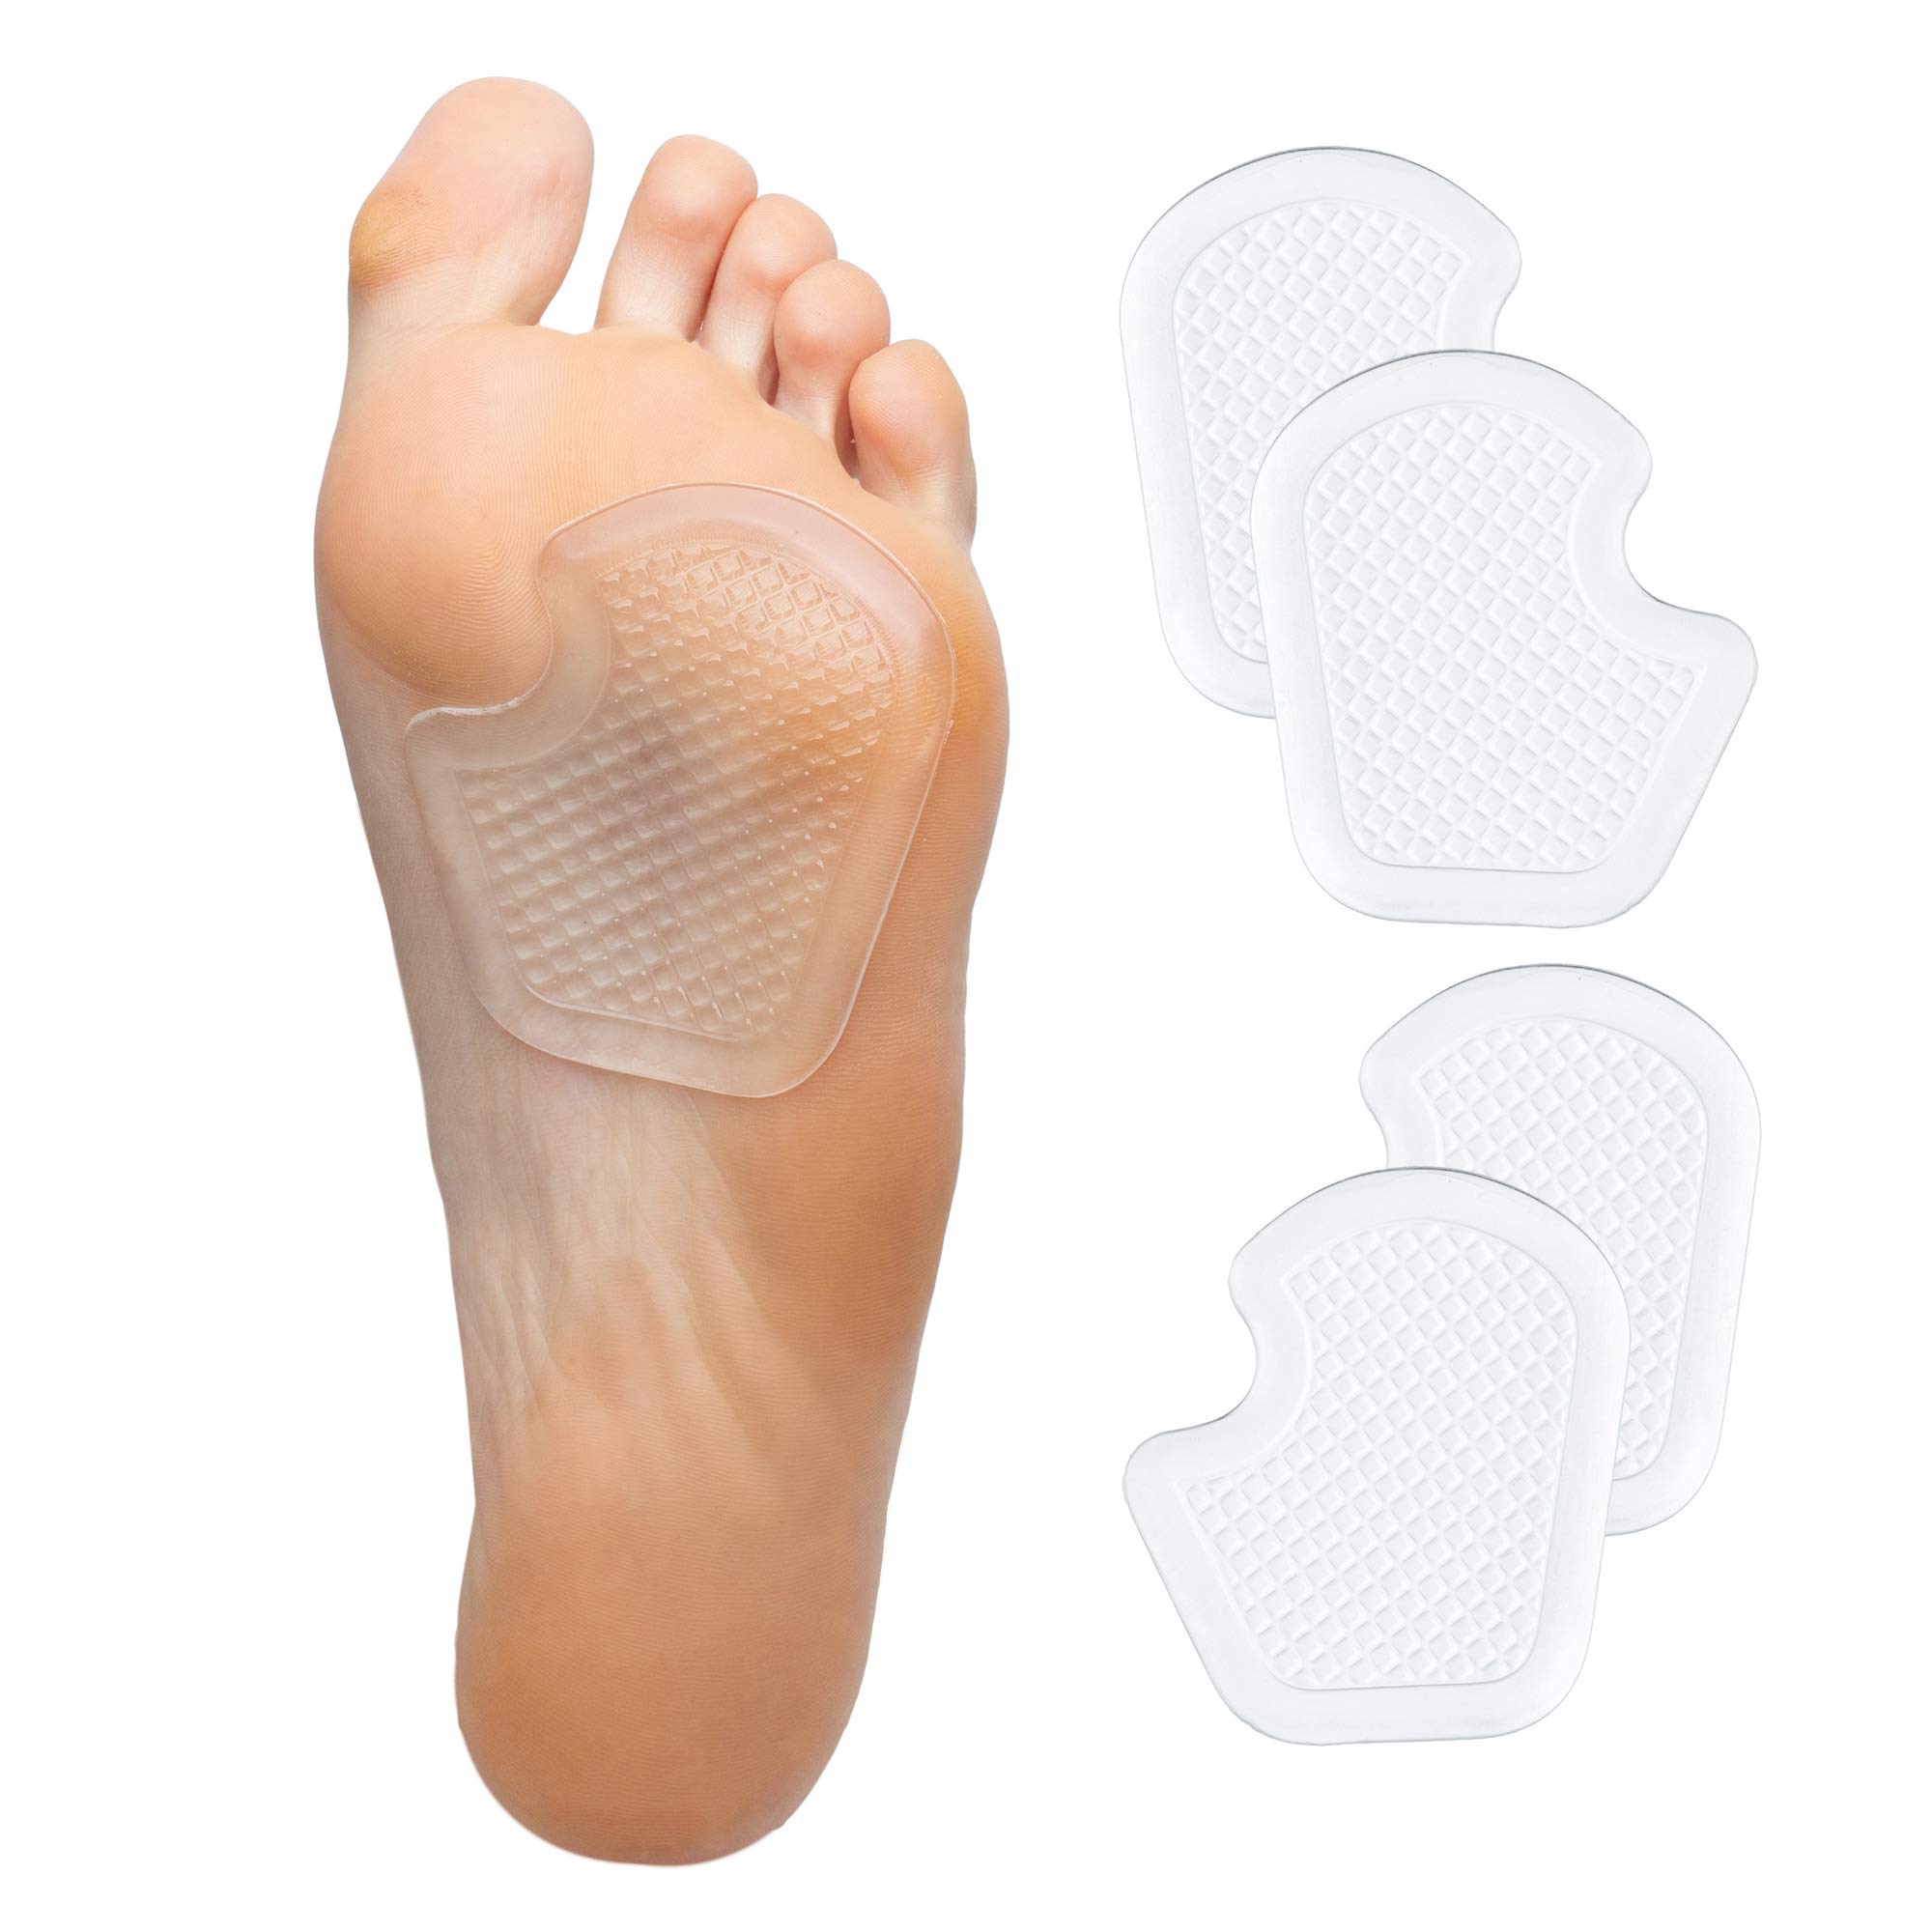 ZenToes Heel Protectors Back of Shoes 8 Cushioned Adhesive Liner